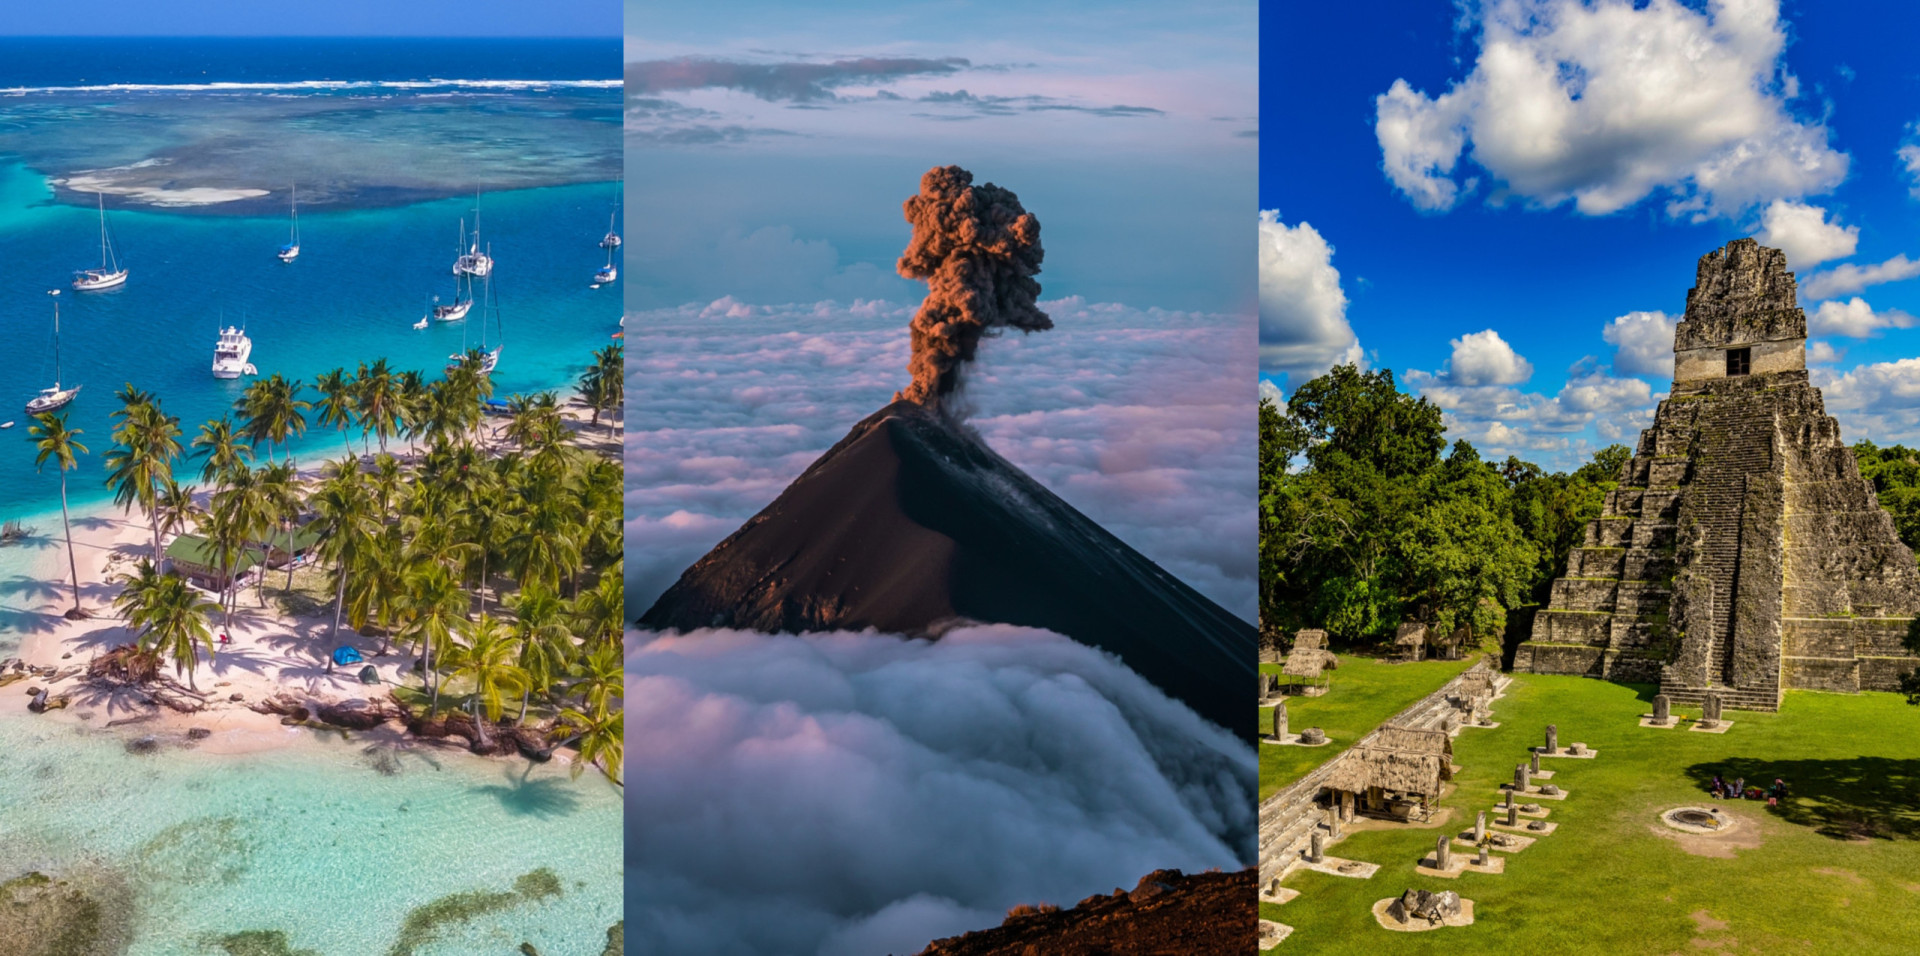 <p>Central America is generally regarded as being composed of seven countries—Guatemala, Belize, Costa Rica, El Salvador, Honduras, Panama, and Nicaragua. That's seven wonderfully compelling vacation destination options famed for stunningly varied <a href="https://www.starsinsider.com/travel/305621/be-amazed-by-these-stunning-jungle-and-rainforest-destinations" rel="noopener">ecosystems</a>, culturally significant historic ruins, and some of the best beaches around. But where do you start?</p> <p>If this part of the world is on your must-see bucket list, click through this gallery for ideas on where to go and what to see!</p><p>You may also like:<a href="https://www.starsinsider.com/n/114291?utm_source=msn.com&utm_medium=display&utm_campaign=referral_description&utm_content=627756en-en"> The hottest and coldest places on the planet</a></p>